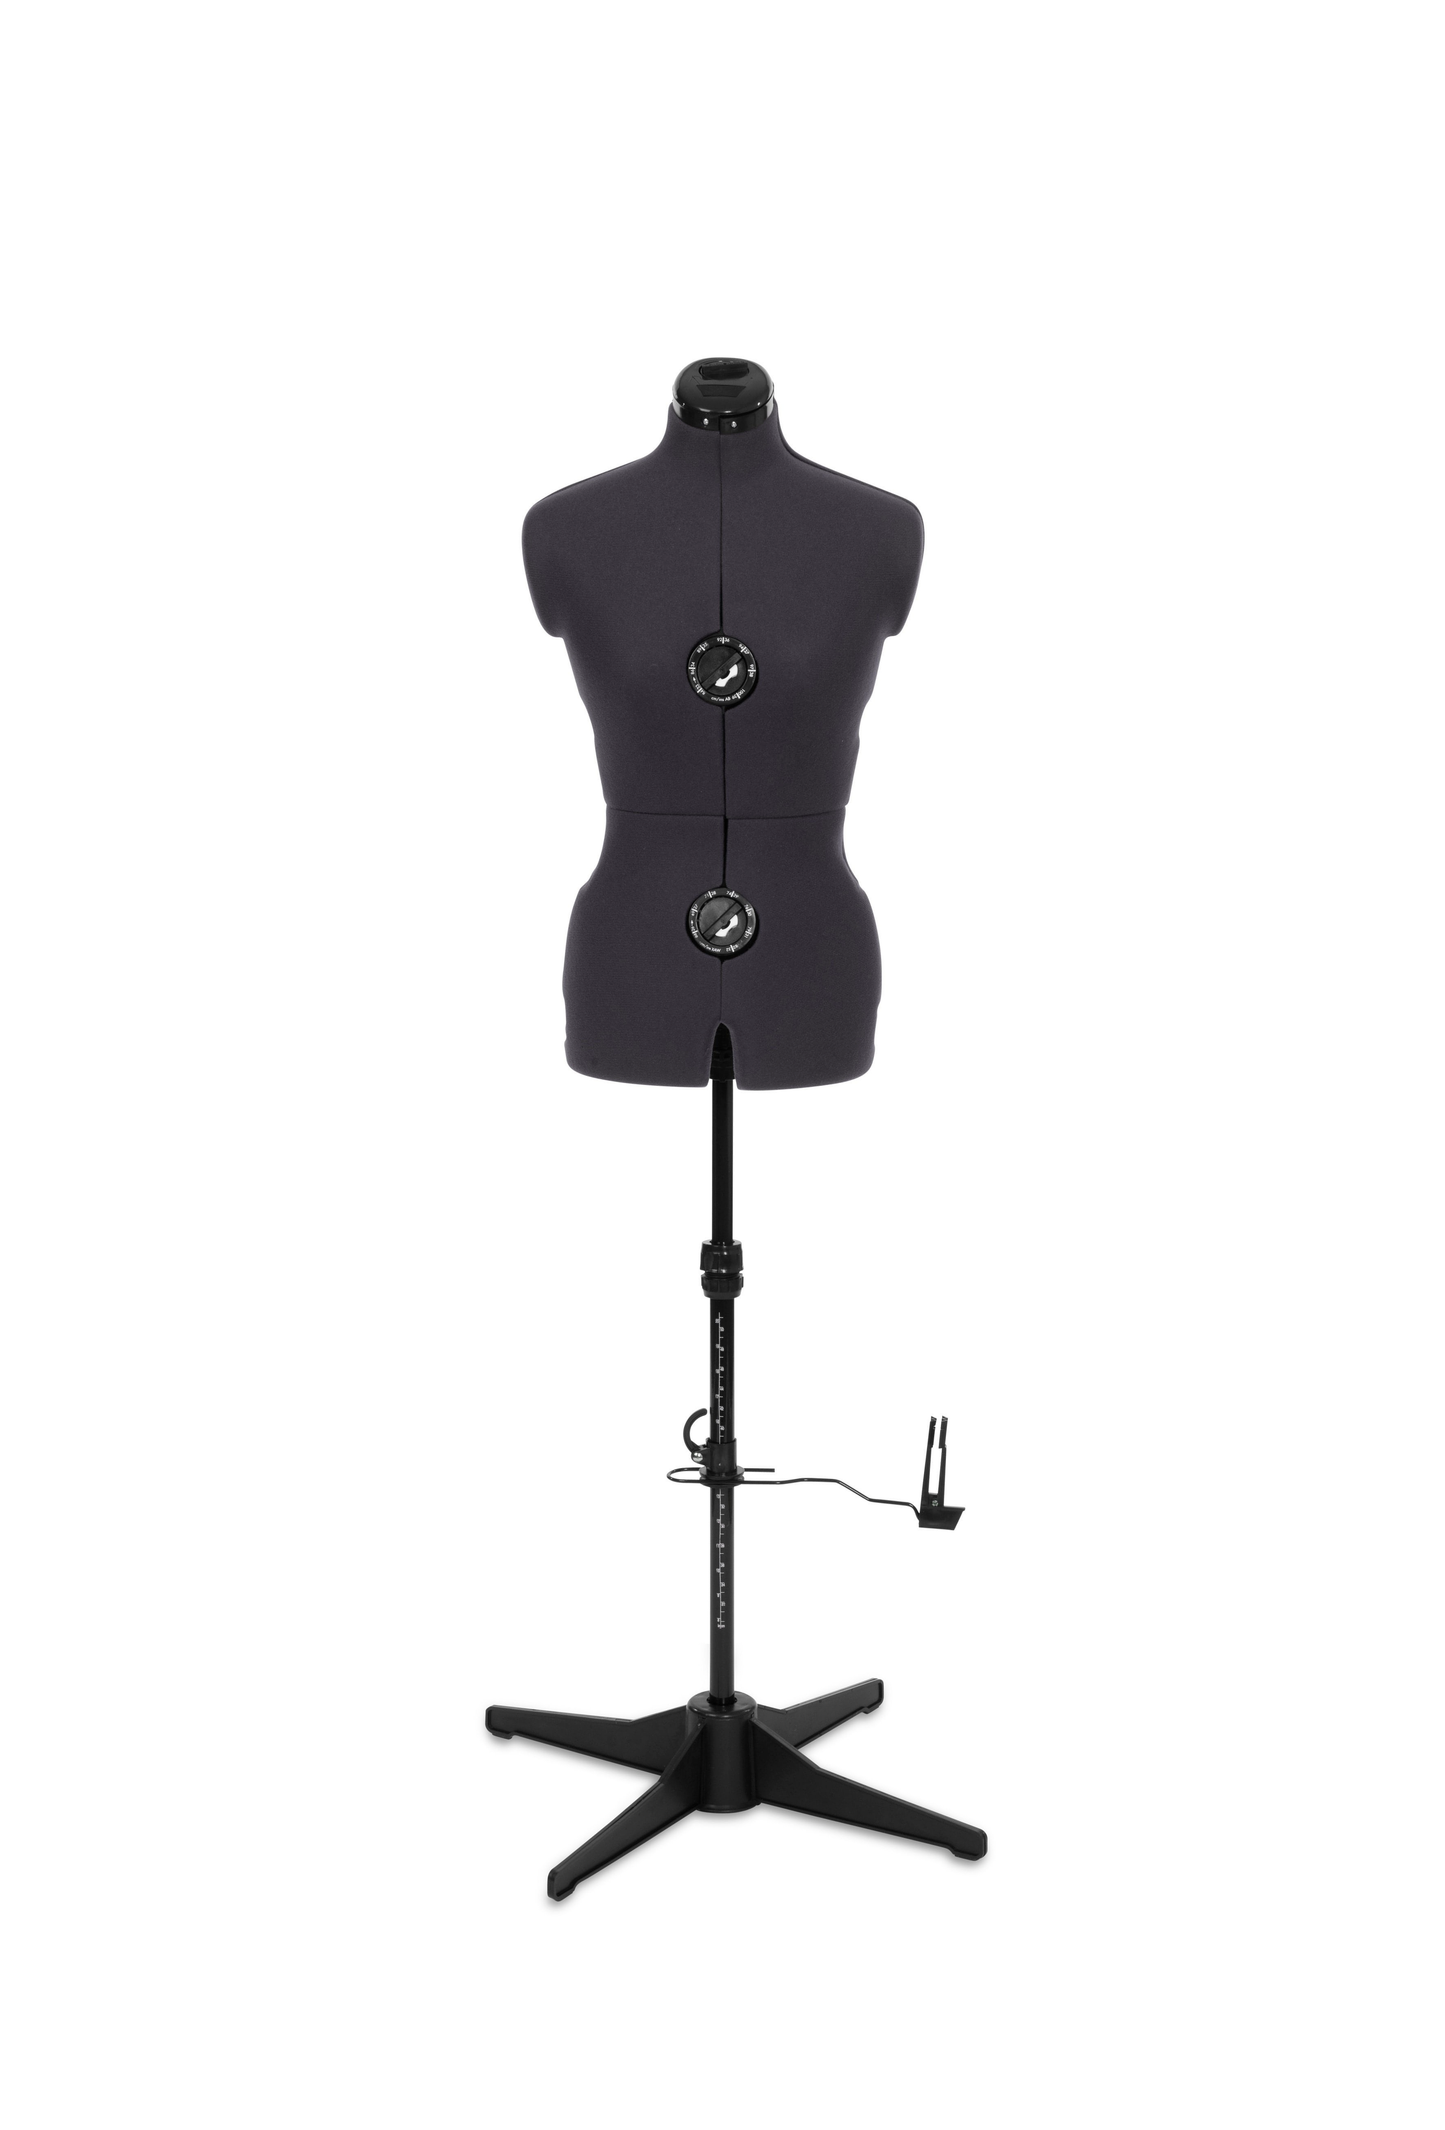 Adjustoform Tailormaid Deluxe Adjustable Dress Form with Accessory Set - Sewing Mannequin - Built in pin grip and hem marker